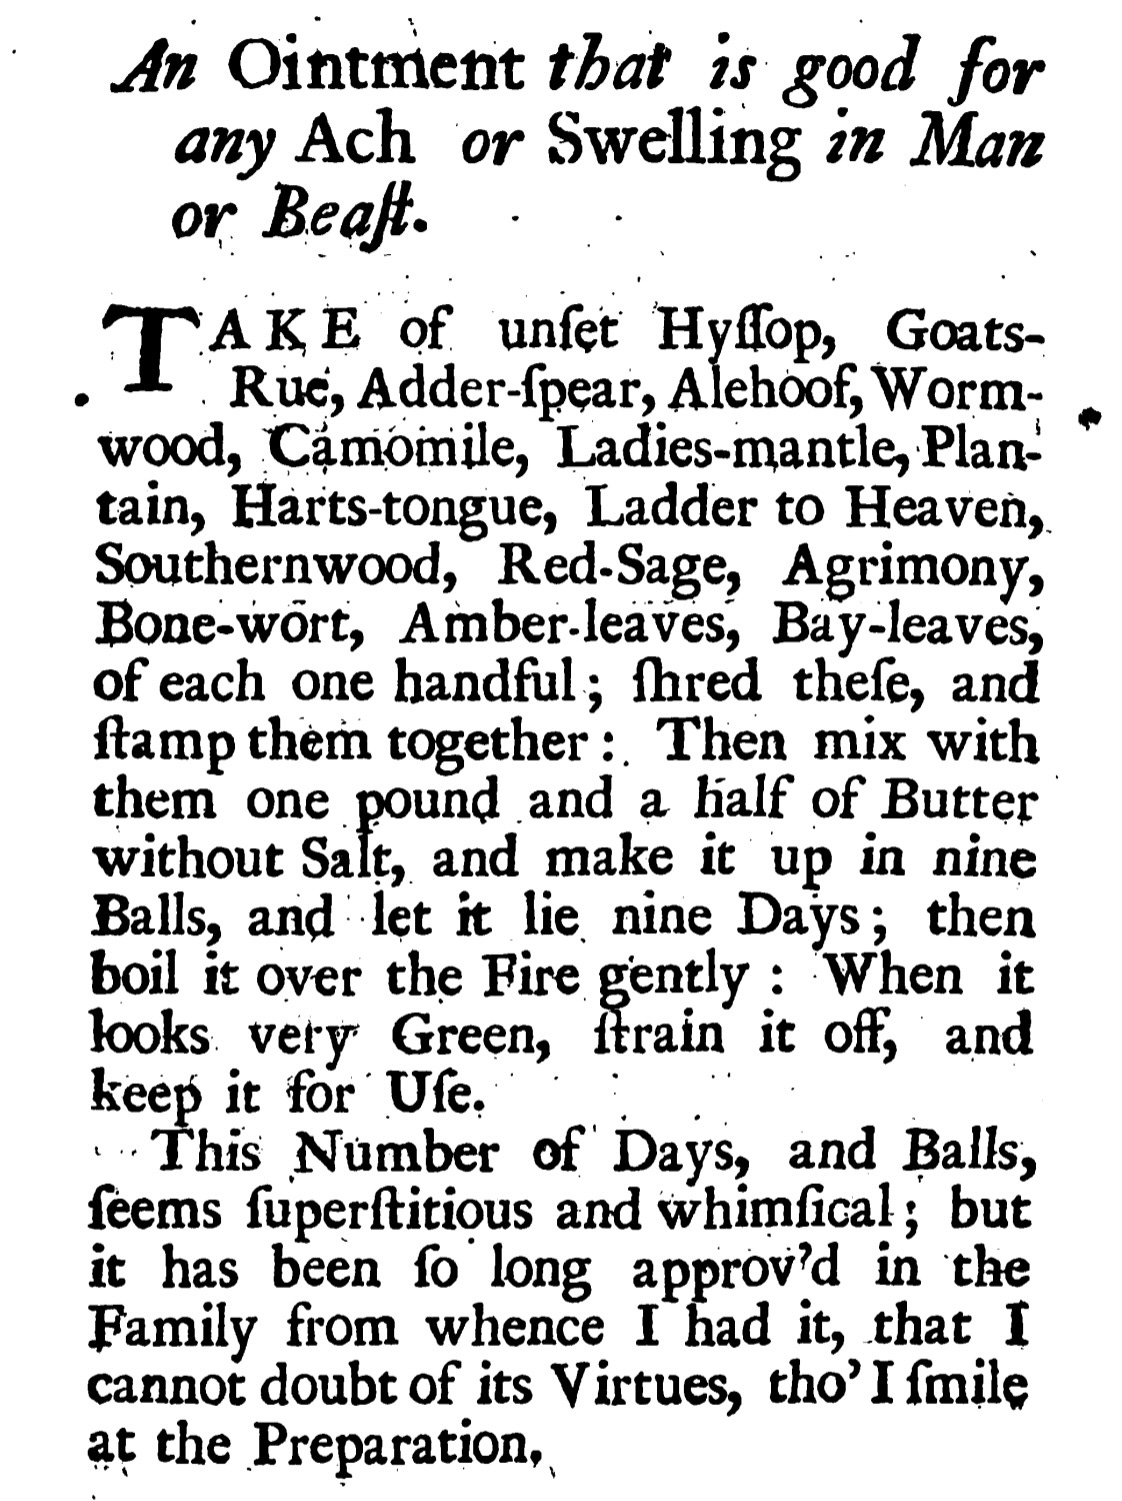 An Ointment that is good for any Ach or Swelling in Man or Beat.  TAKE of unfet Hylop, Goats-  • Rue, Adder-(pear, Alehoof, Worm-wood, Camomile, Ladies-mantle, Plan-tain, Harts-tongue, Ladder to Heaven,.  Southernwood, Red-Sage, Agrimony, Bone-wort, Amber-leaves, Bay-leaves, of each one handful; ihred thefe, and famp them together: Then mix with them one pound and a half of Butter without Salt, and make it up in nine Balls, and let it lie nine Days; then boil it over the Fire gently: When it looks very Green, ftrain it off, and keep it for Ufe.  ..This Number of Days, and Balls, feems fuperftitious and whimfical; but it has been fo long approv'd in the Family from whence I had it, that I cannot doubt of its Virtues, tho' I mile at the Preparation,